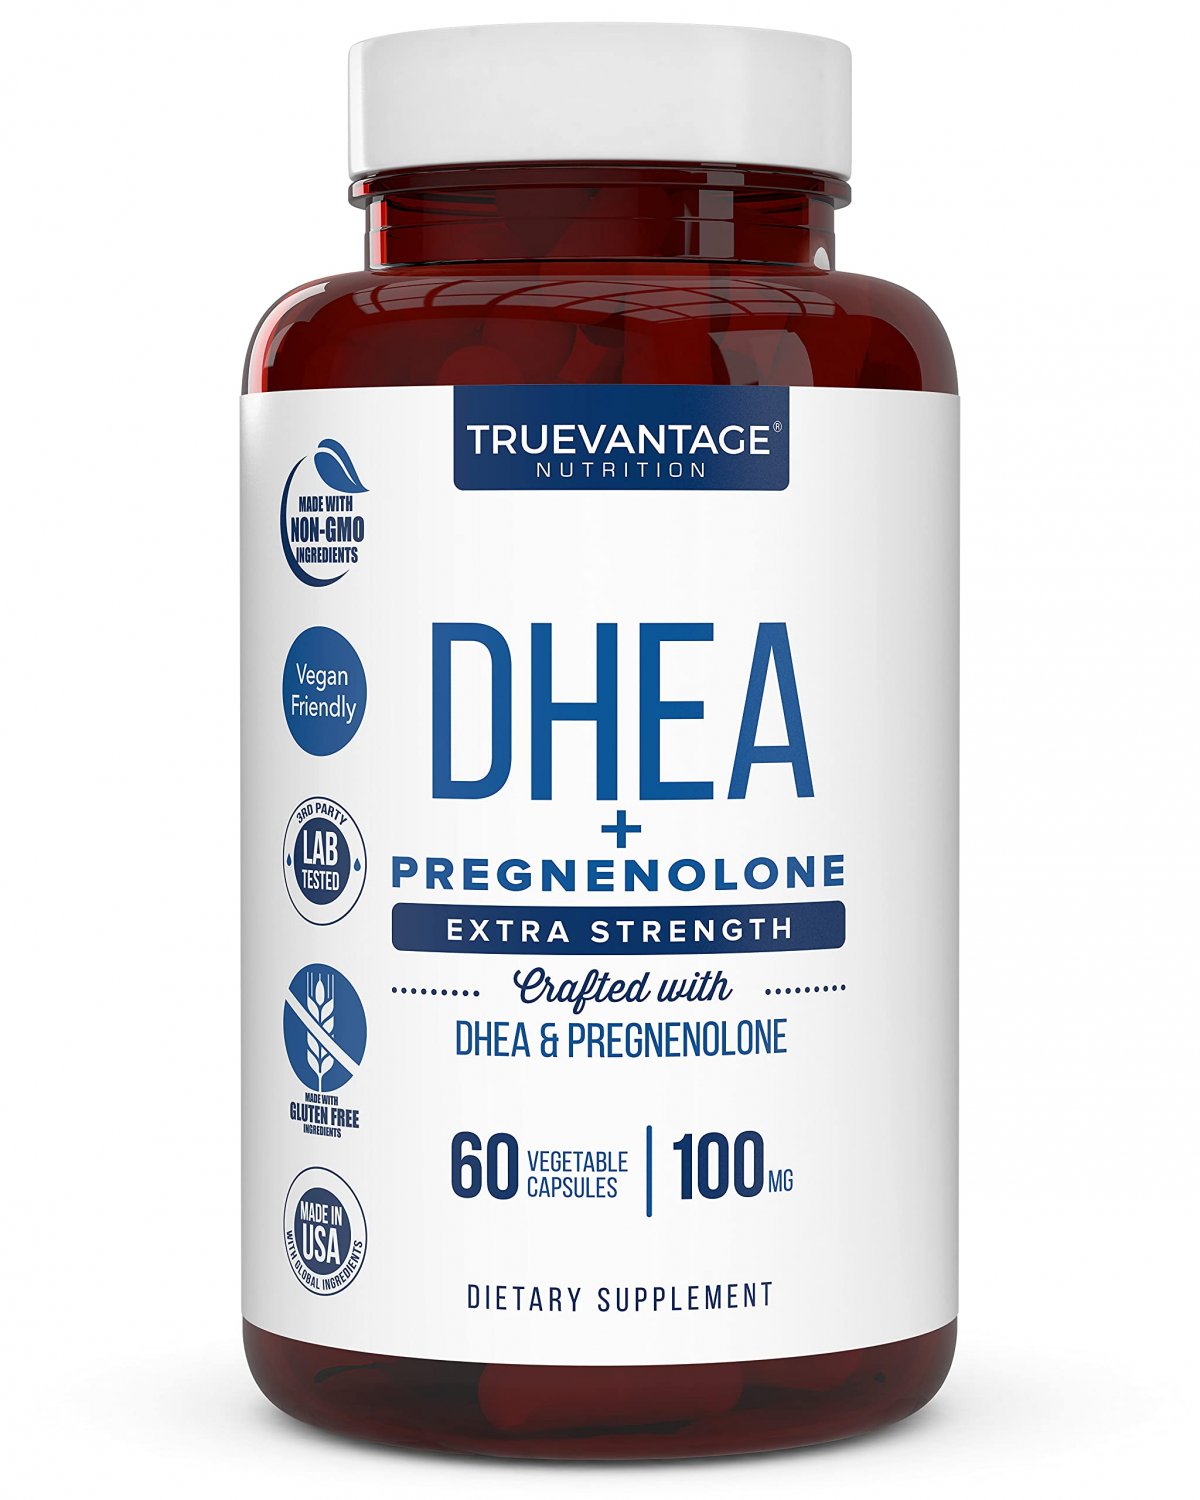 Dhea 100mg Supplement With Pregnenolone 60mg Supports Hormone Balance Lean Muscle Mass Energy Mo